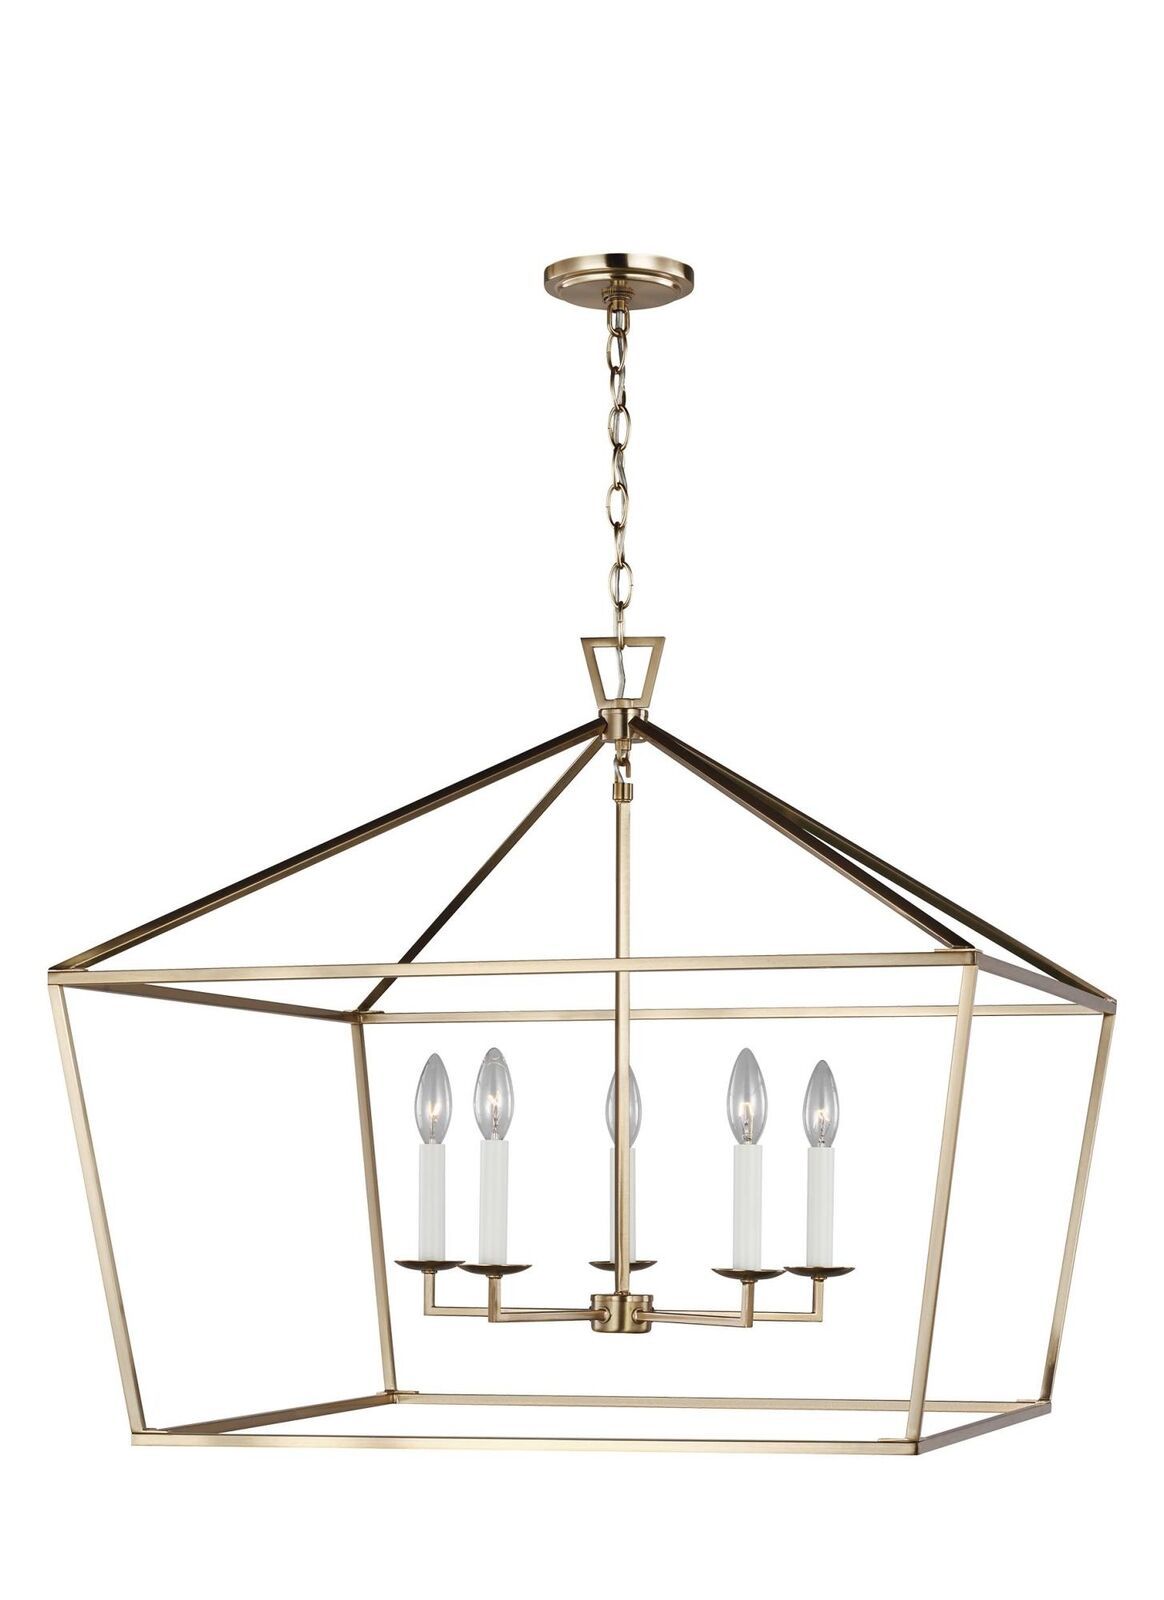 Chandelier Fixture Selection : How to Choose the Perfect Chandelier Fixture for Your Home